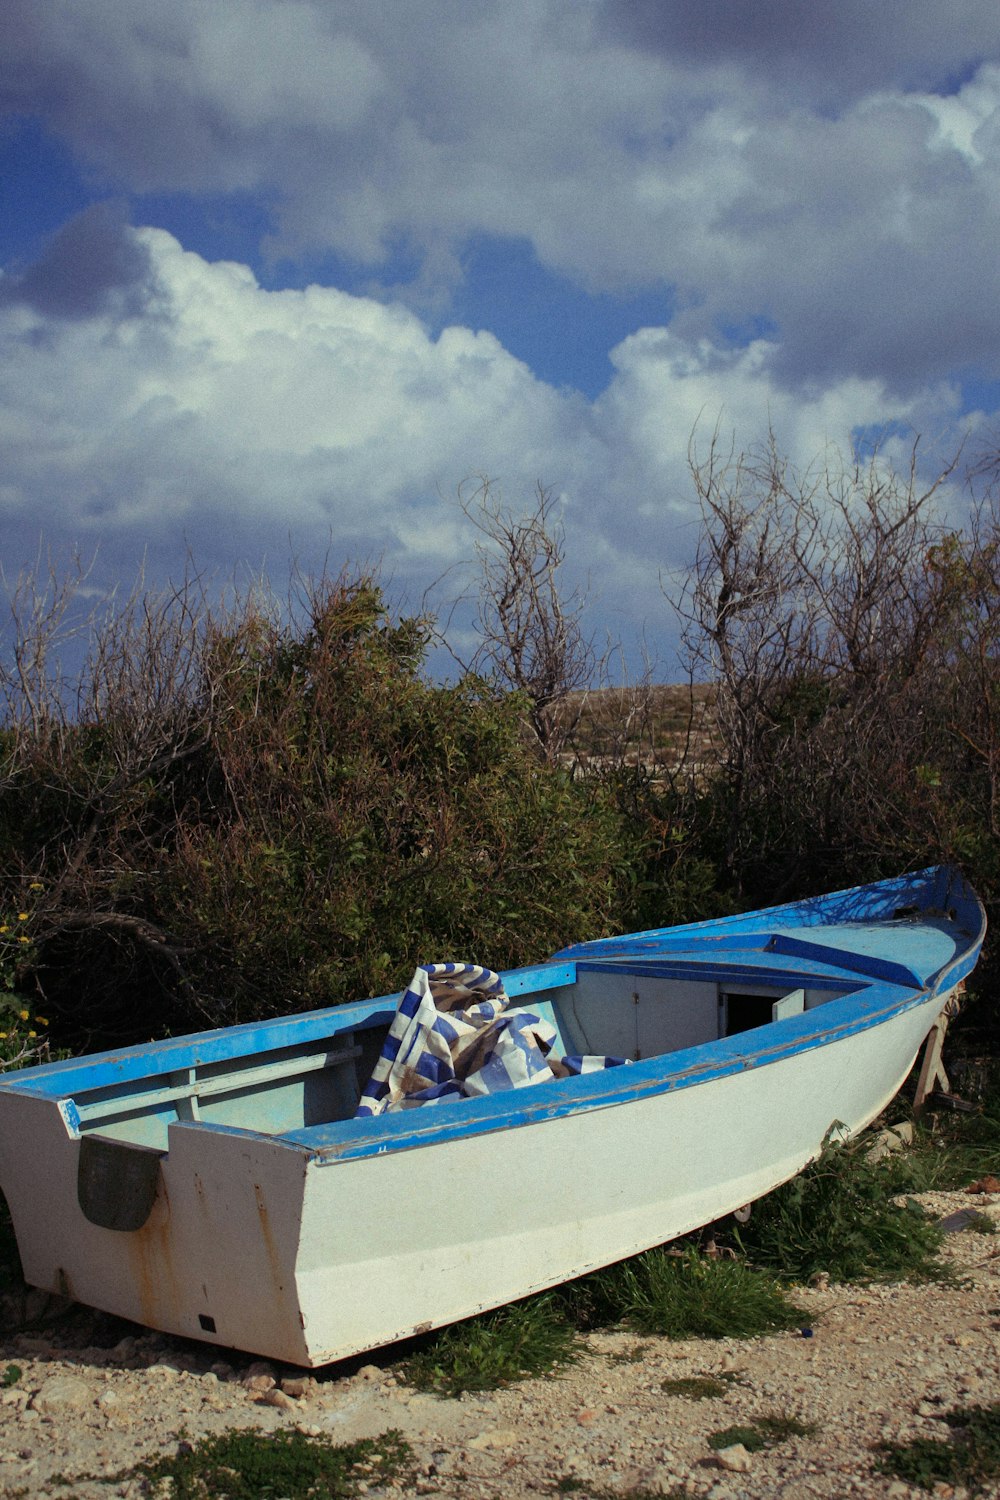 a blue and white boat sitting on top of a sandy beach